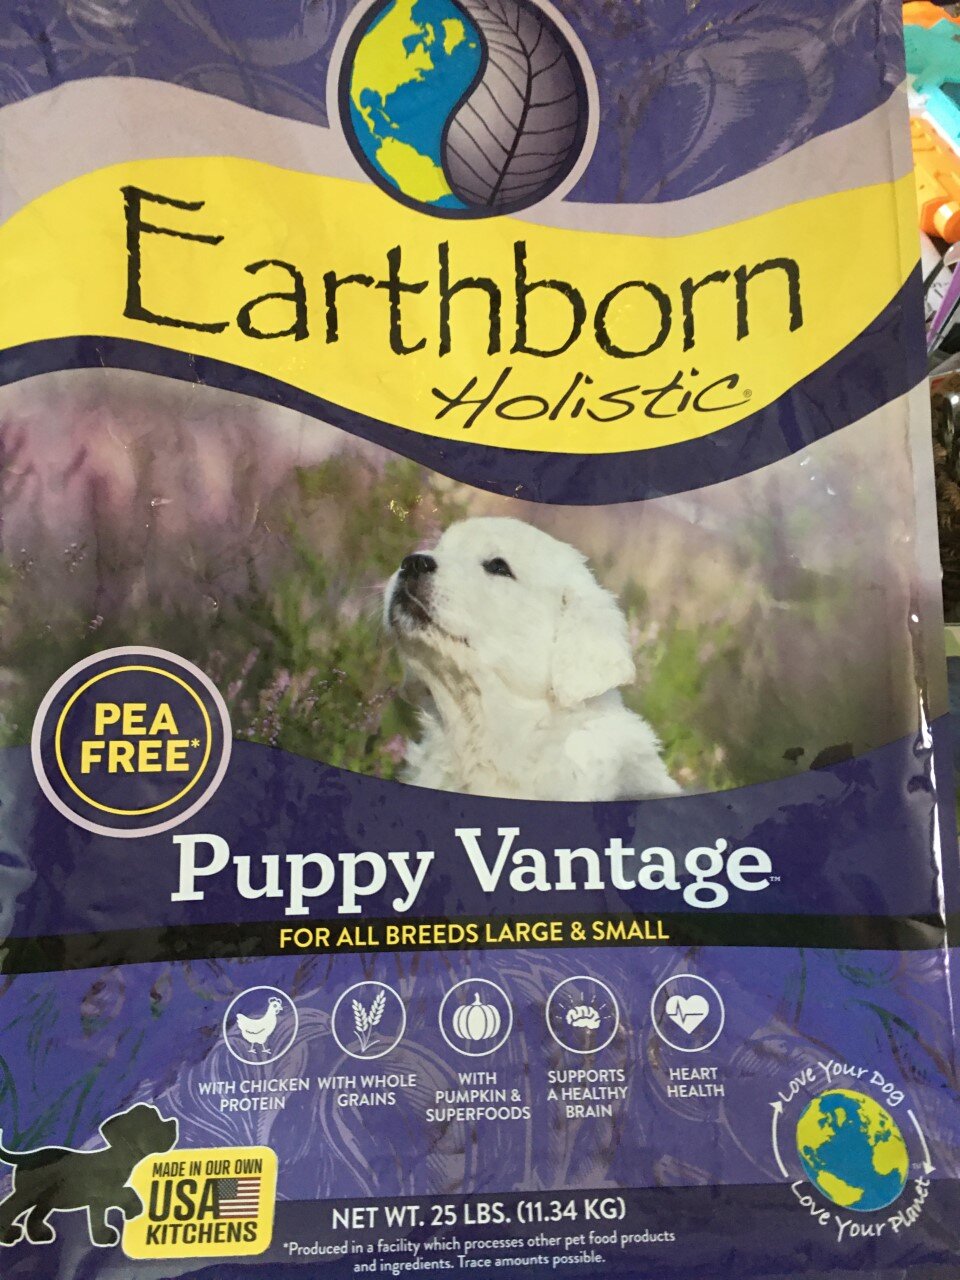 I feed and recommend Earthborn Puppy Food